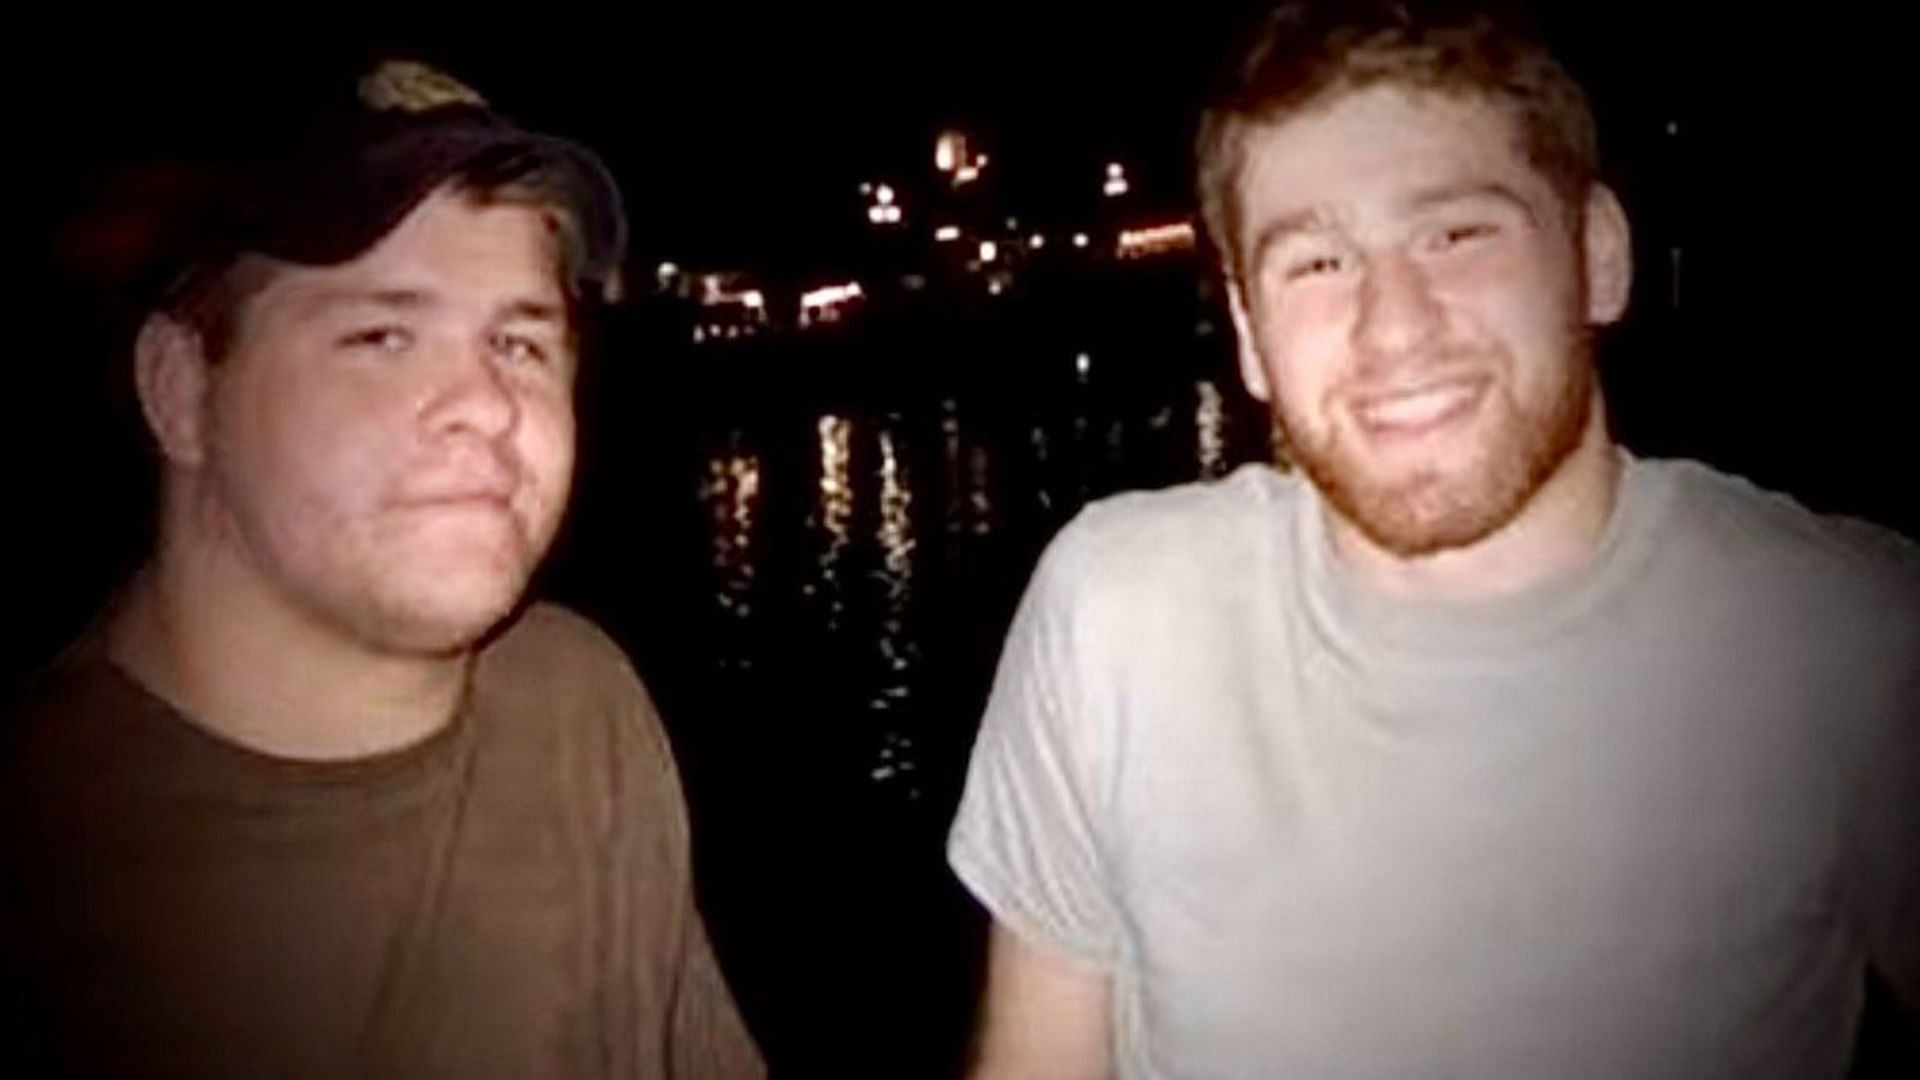 Kevin Owens and Sami Zayn became friends over two decades ago